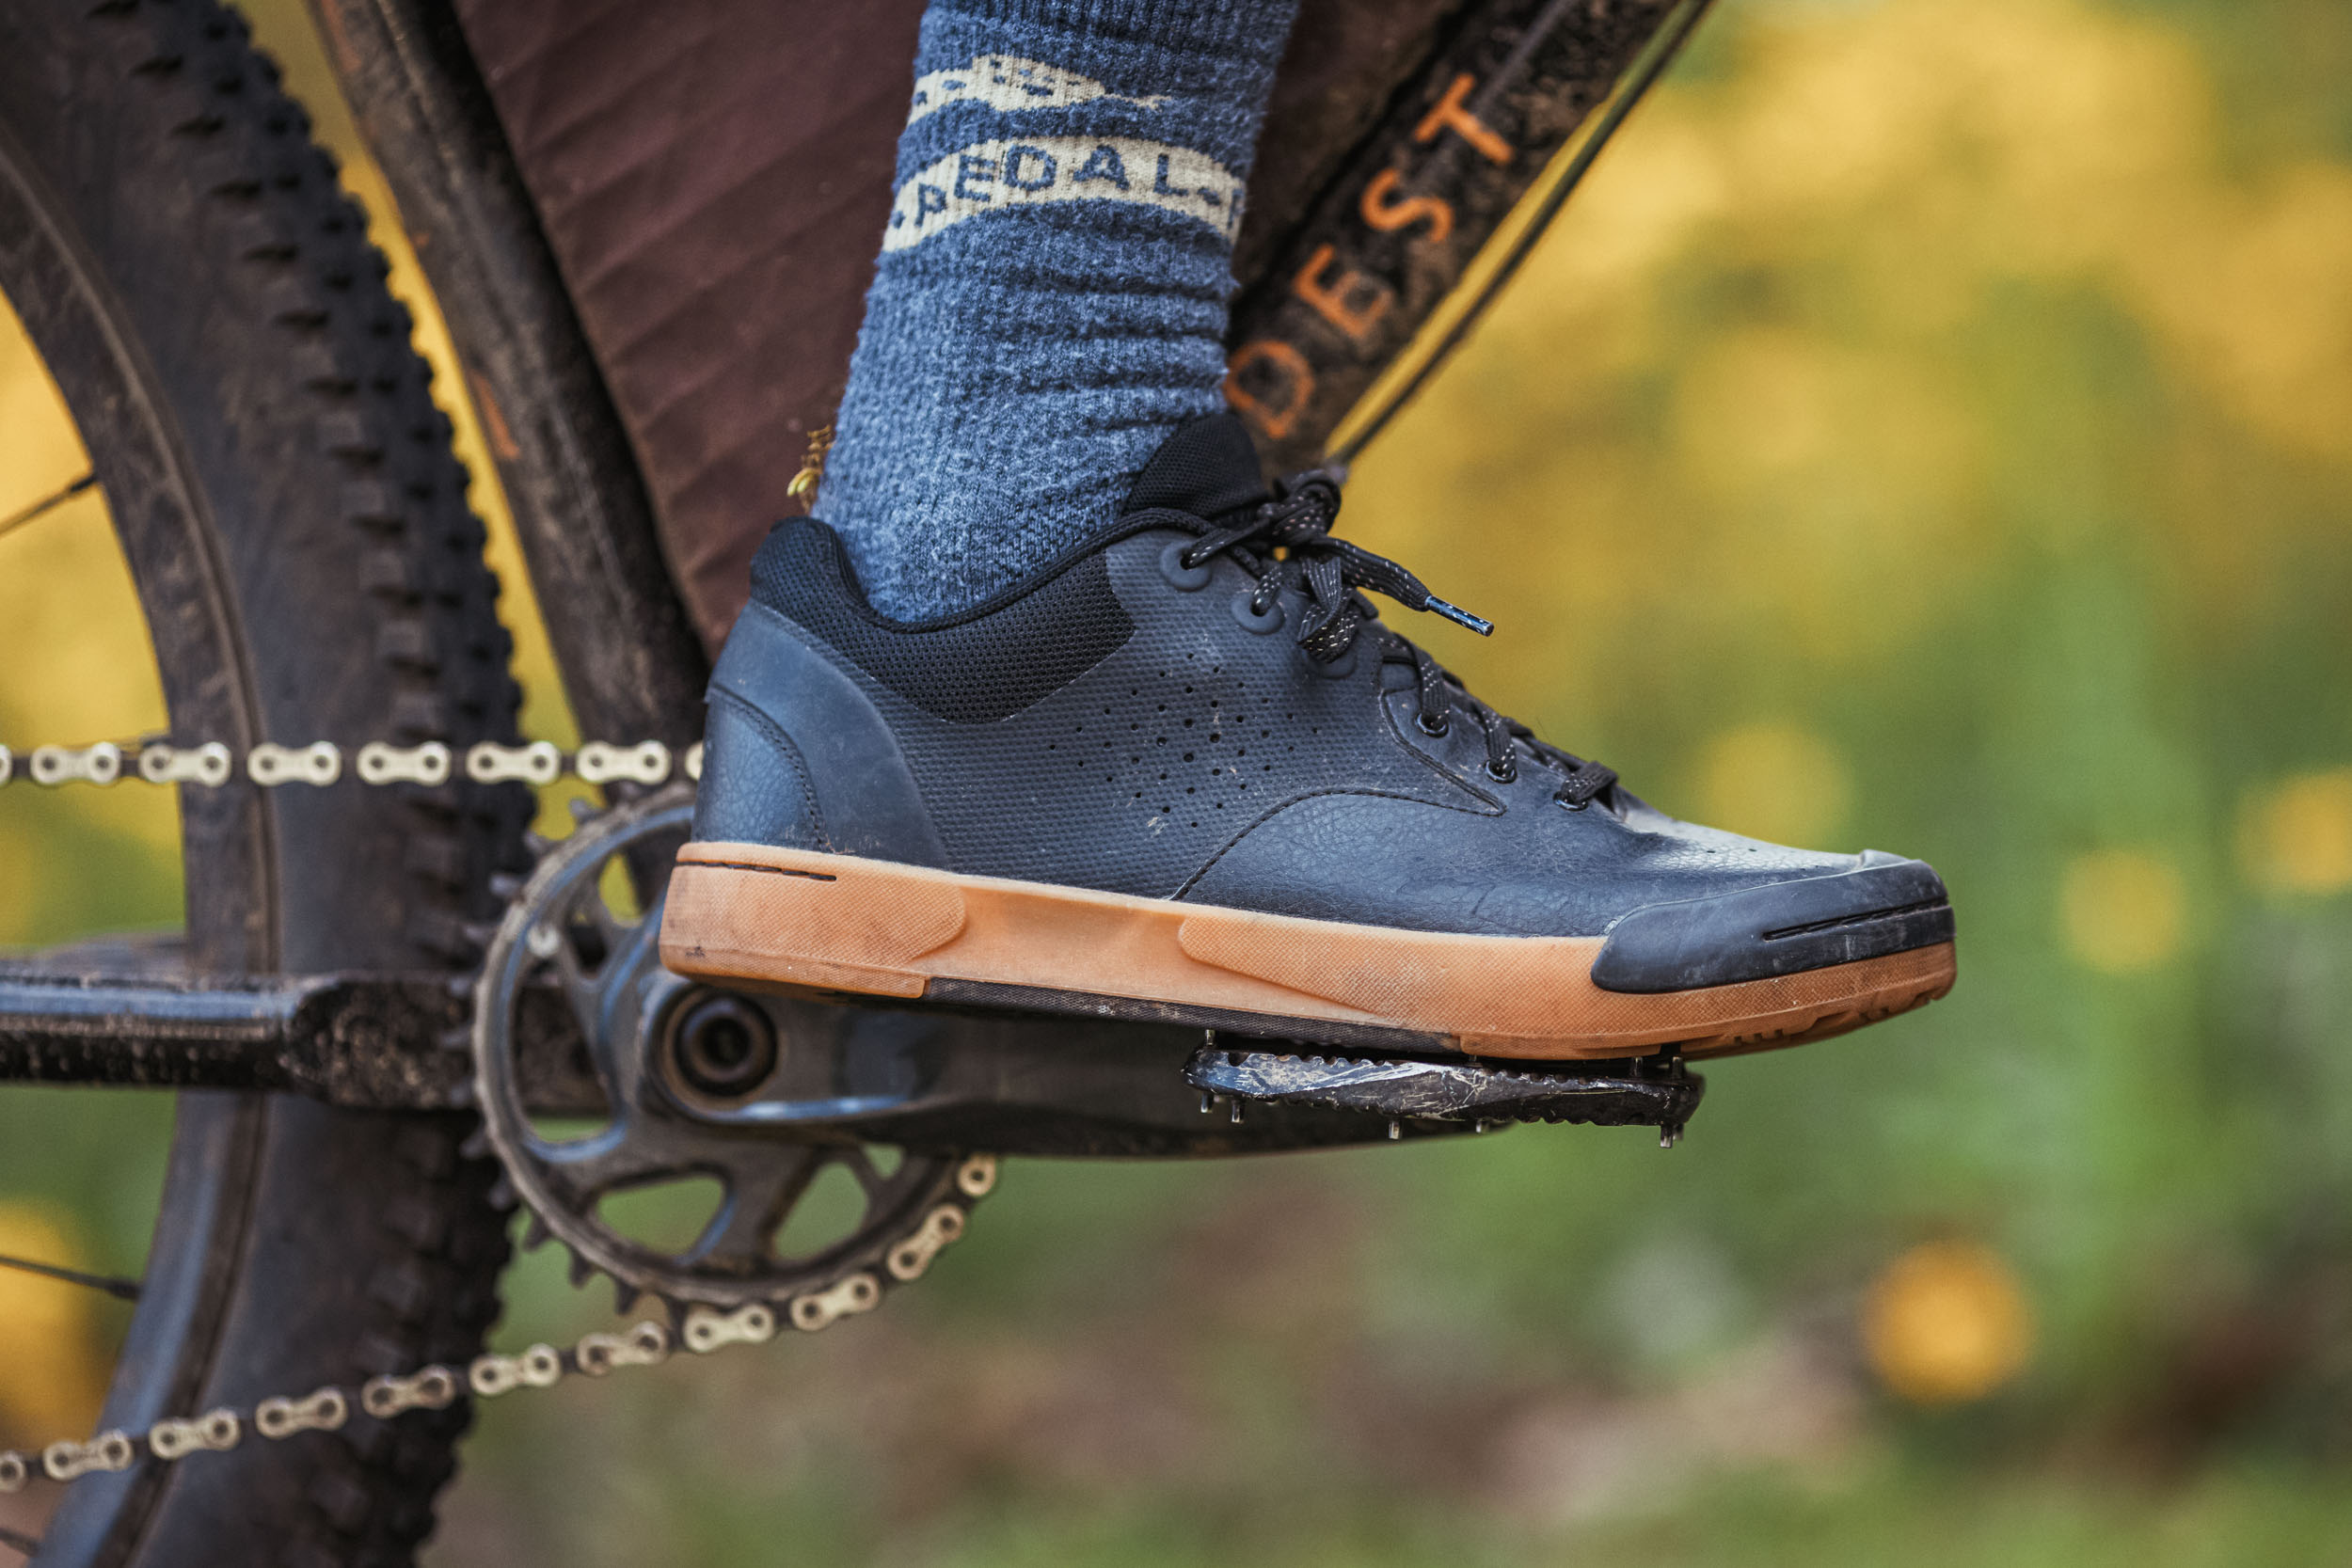 The Best Flat Pedal Mountain Bike Shoes of 2021 